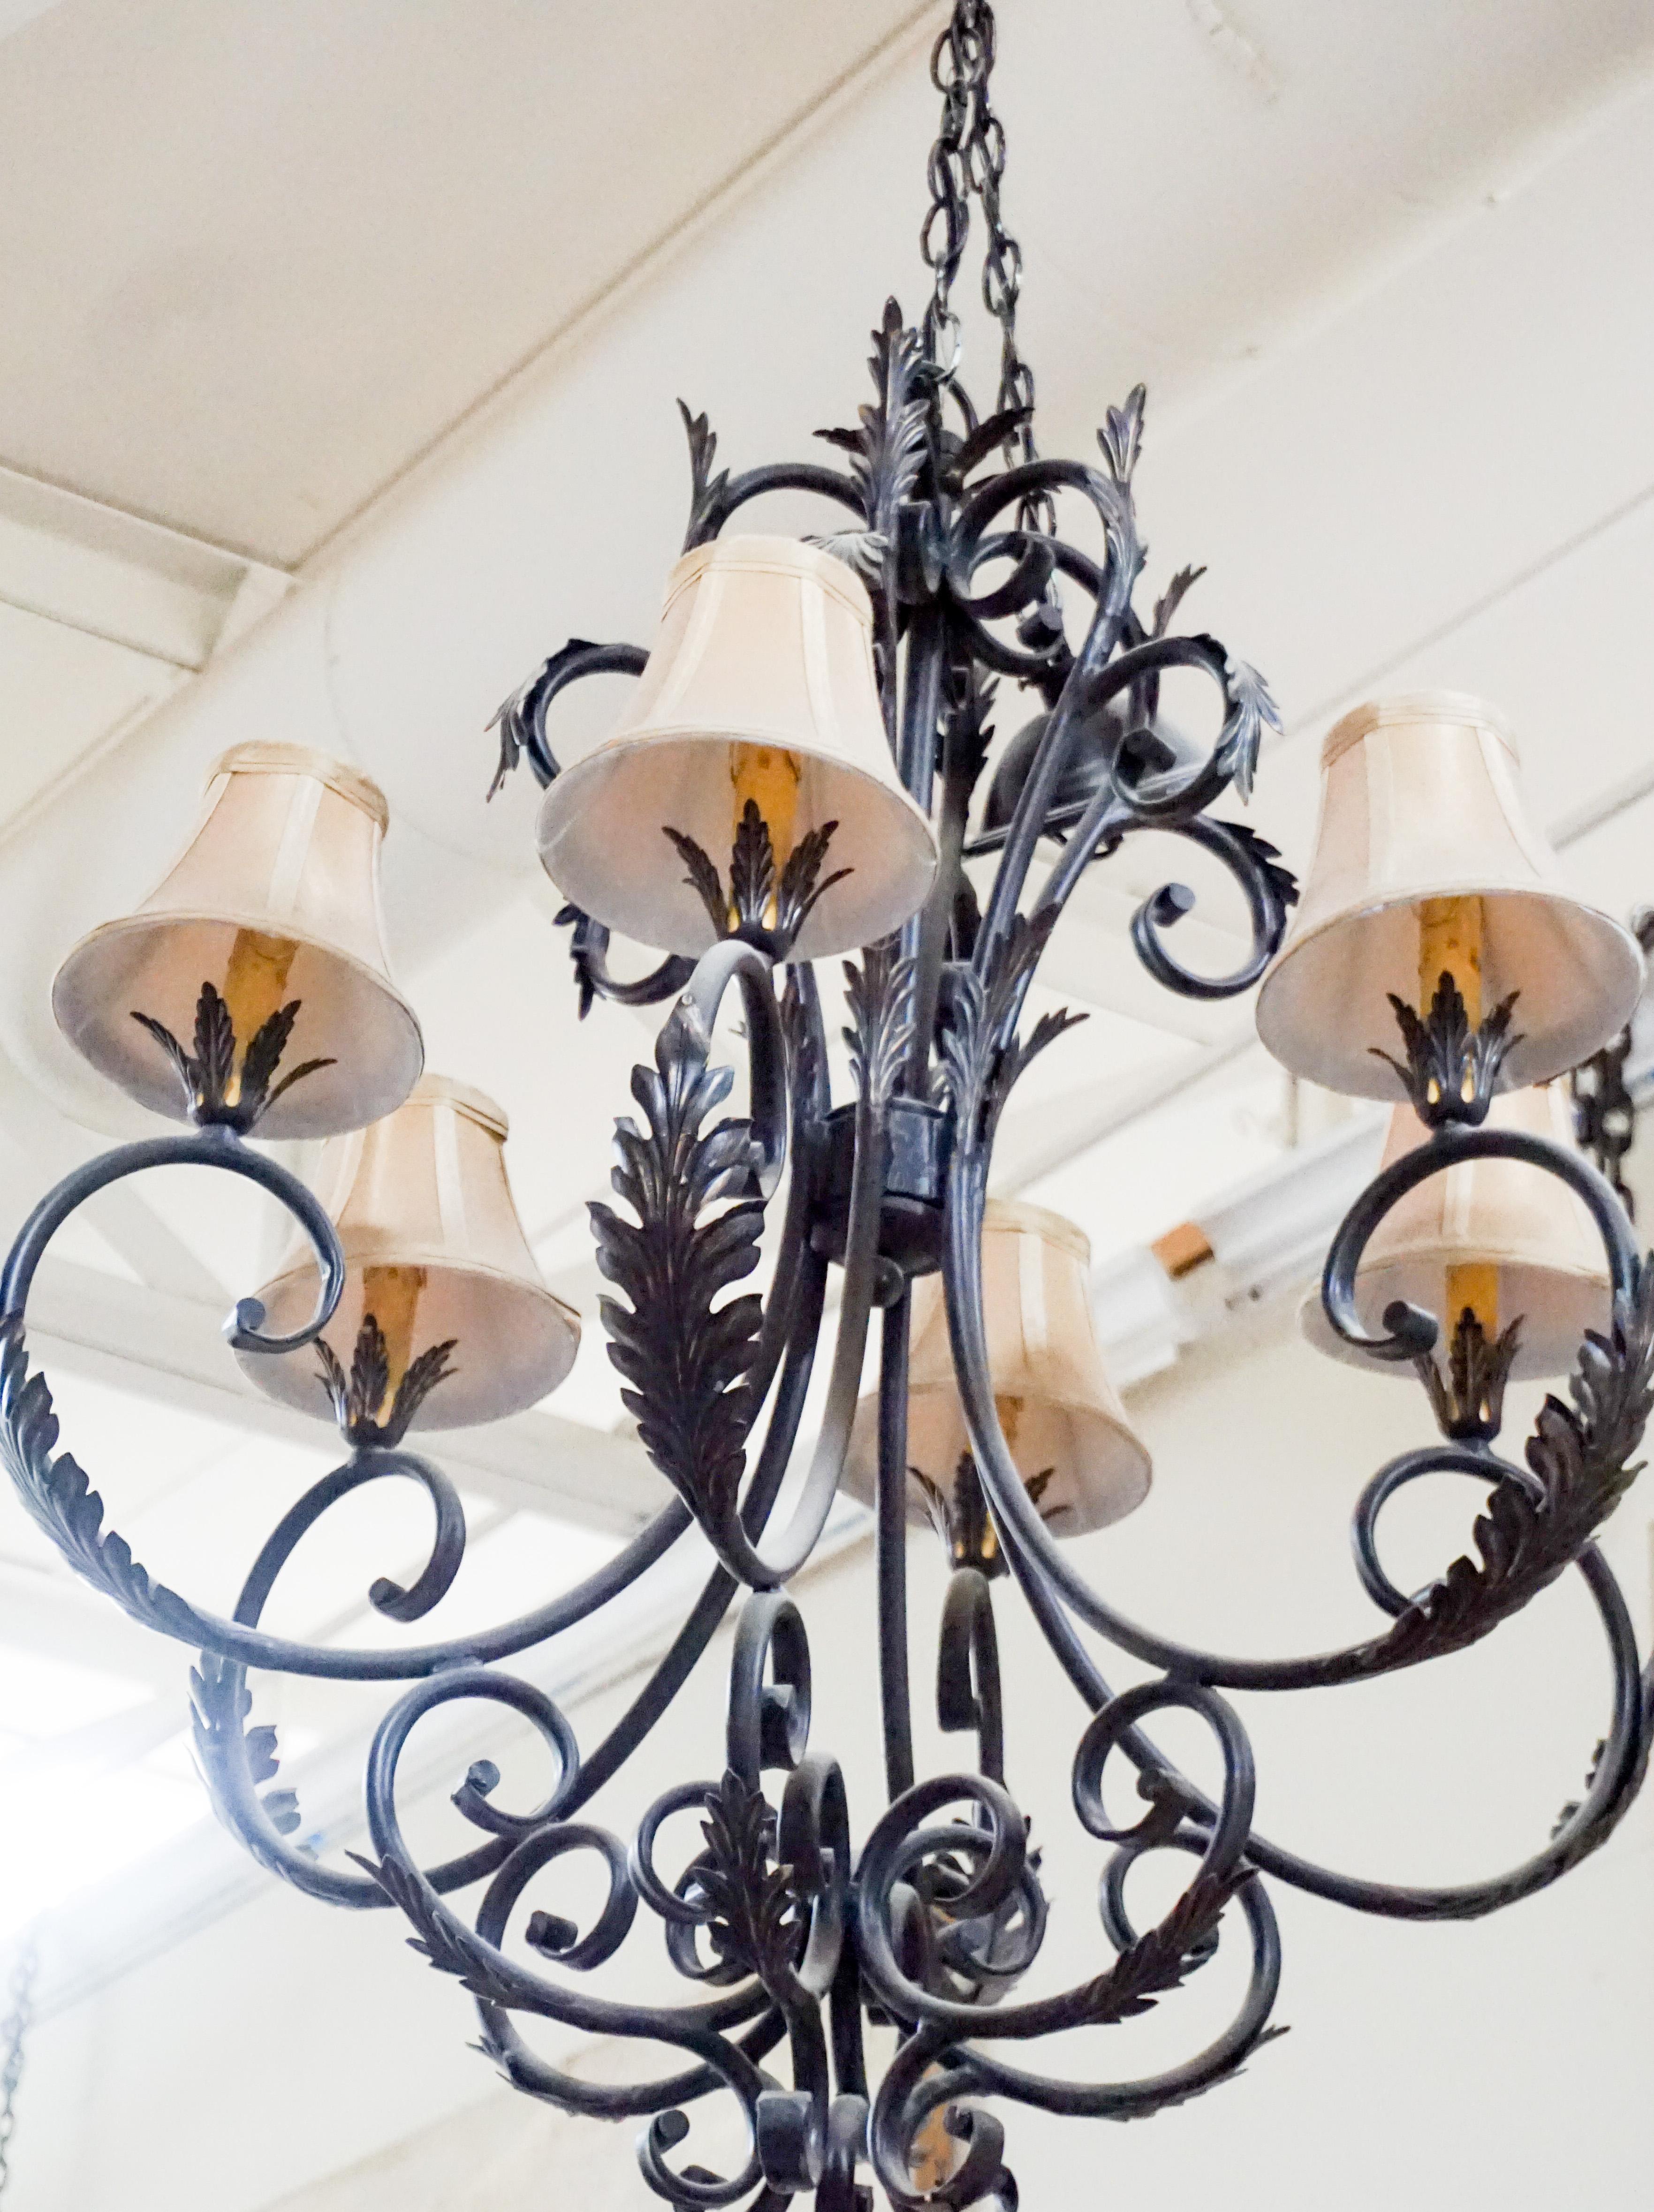 French wrought iron chandelier featuring acanthus leaf decode and 6 arms topped with small shades.